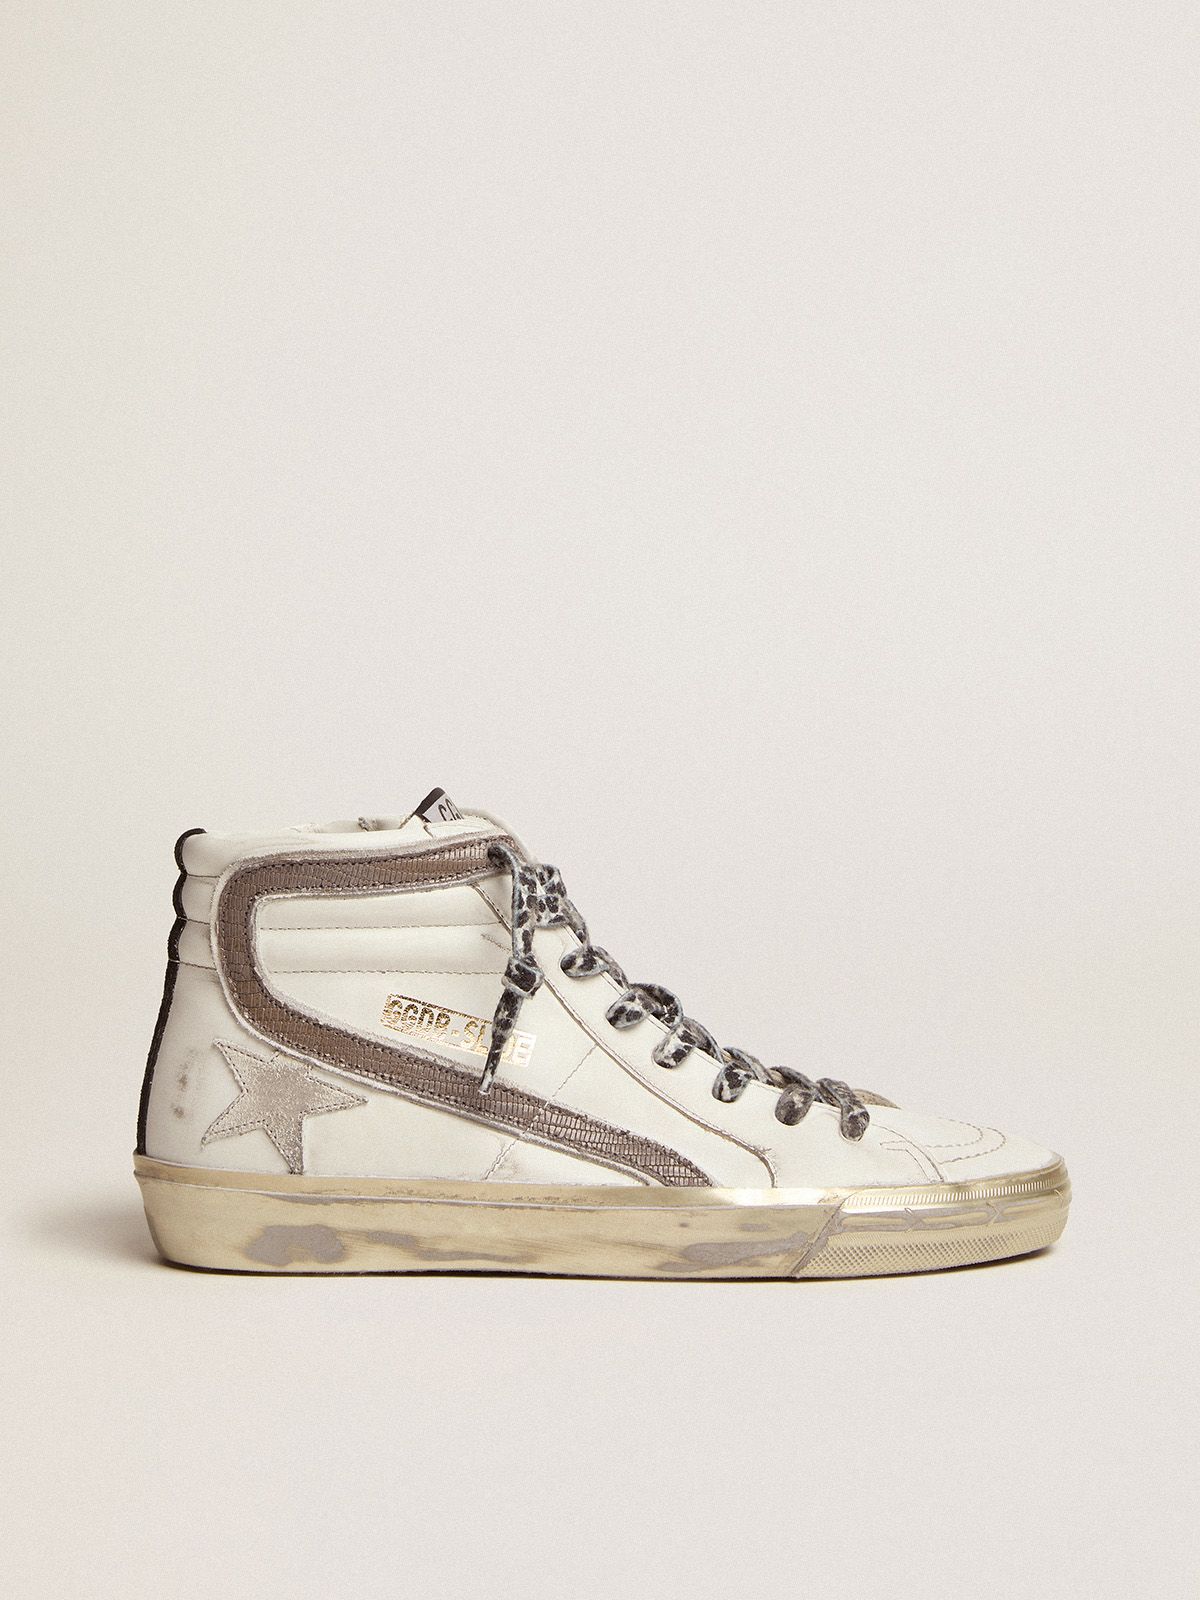 golden goose lizard-print white sneakers with Slide and suede flash leather star dove-gray